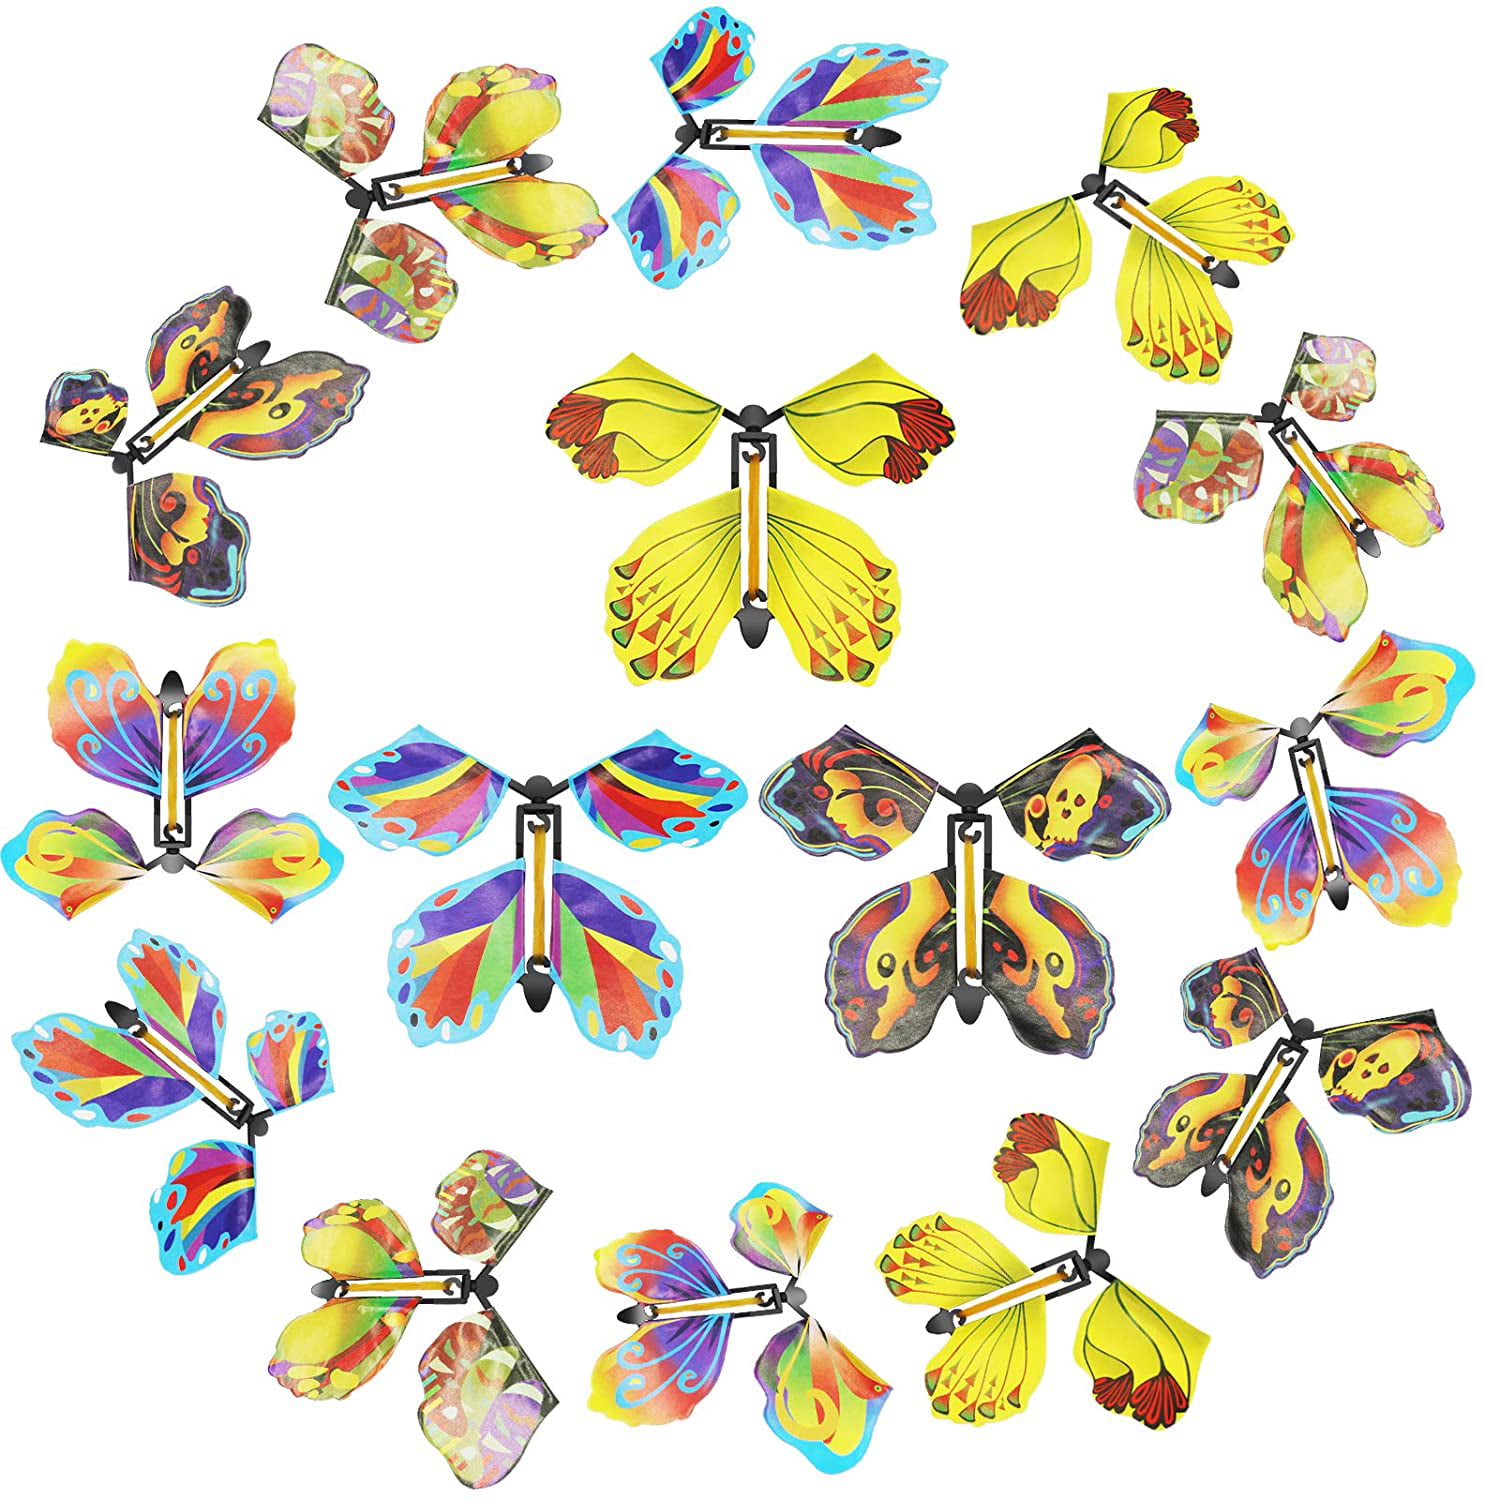 15PCS Magic Fairy Flying Butterfly,Easter Basket Gifts for Kids,Card Wind  up Butterfly Rubber Band Flying Butterfly Surprise Flying Paper Butterflies  Set for Party Playing Decorations - Walmart.com